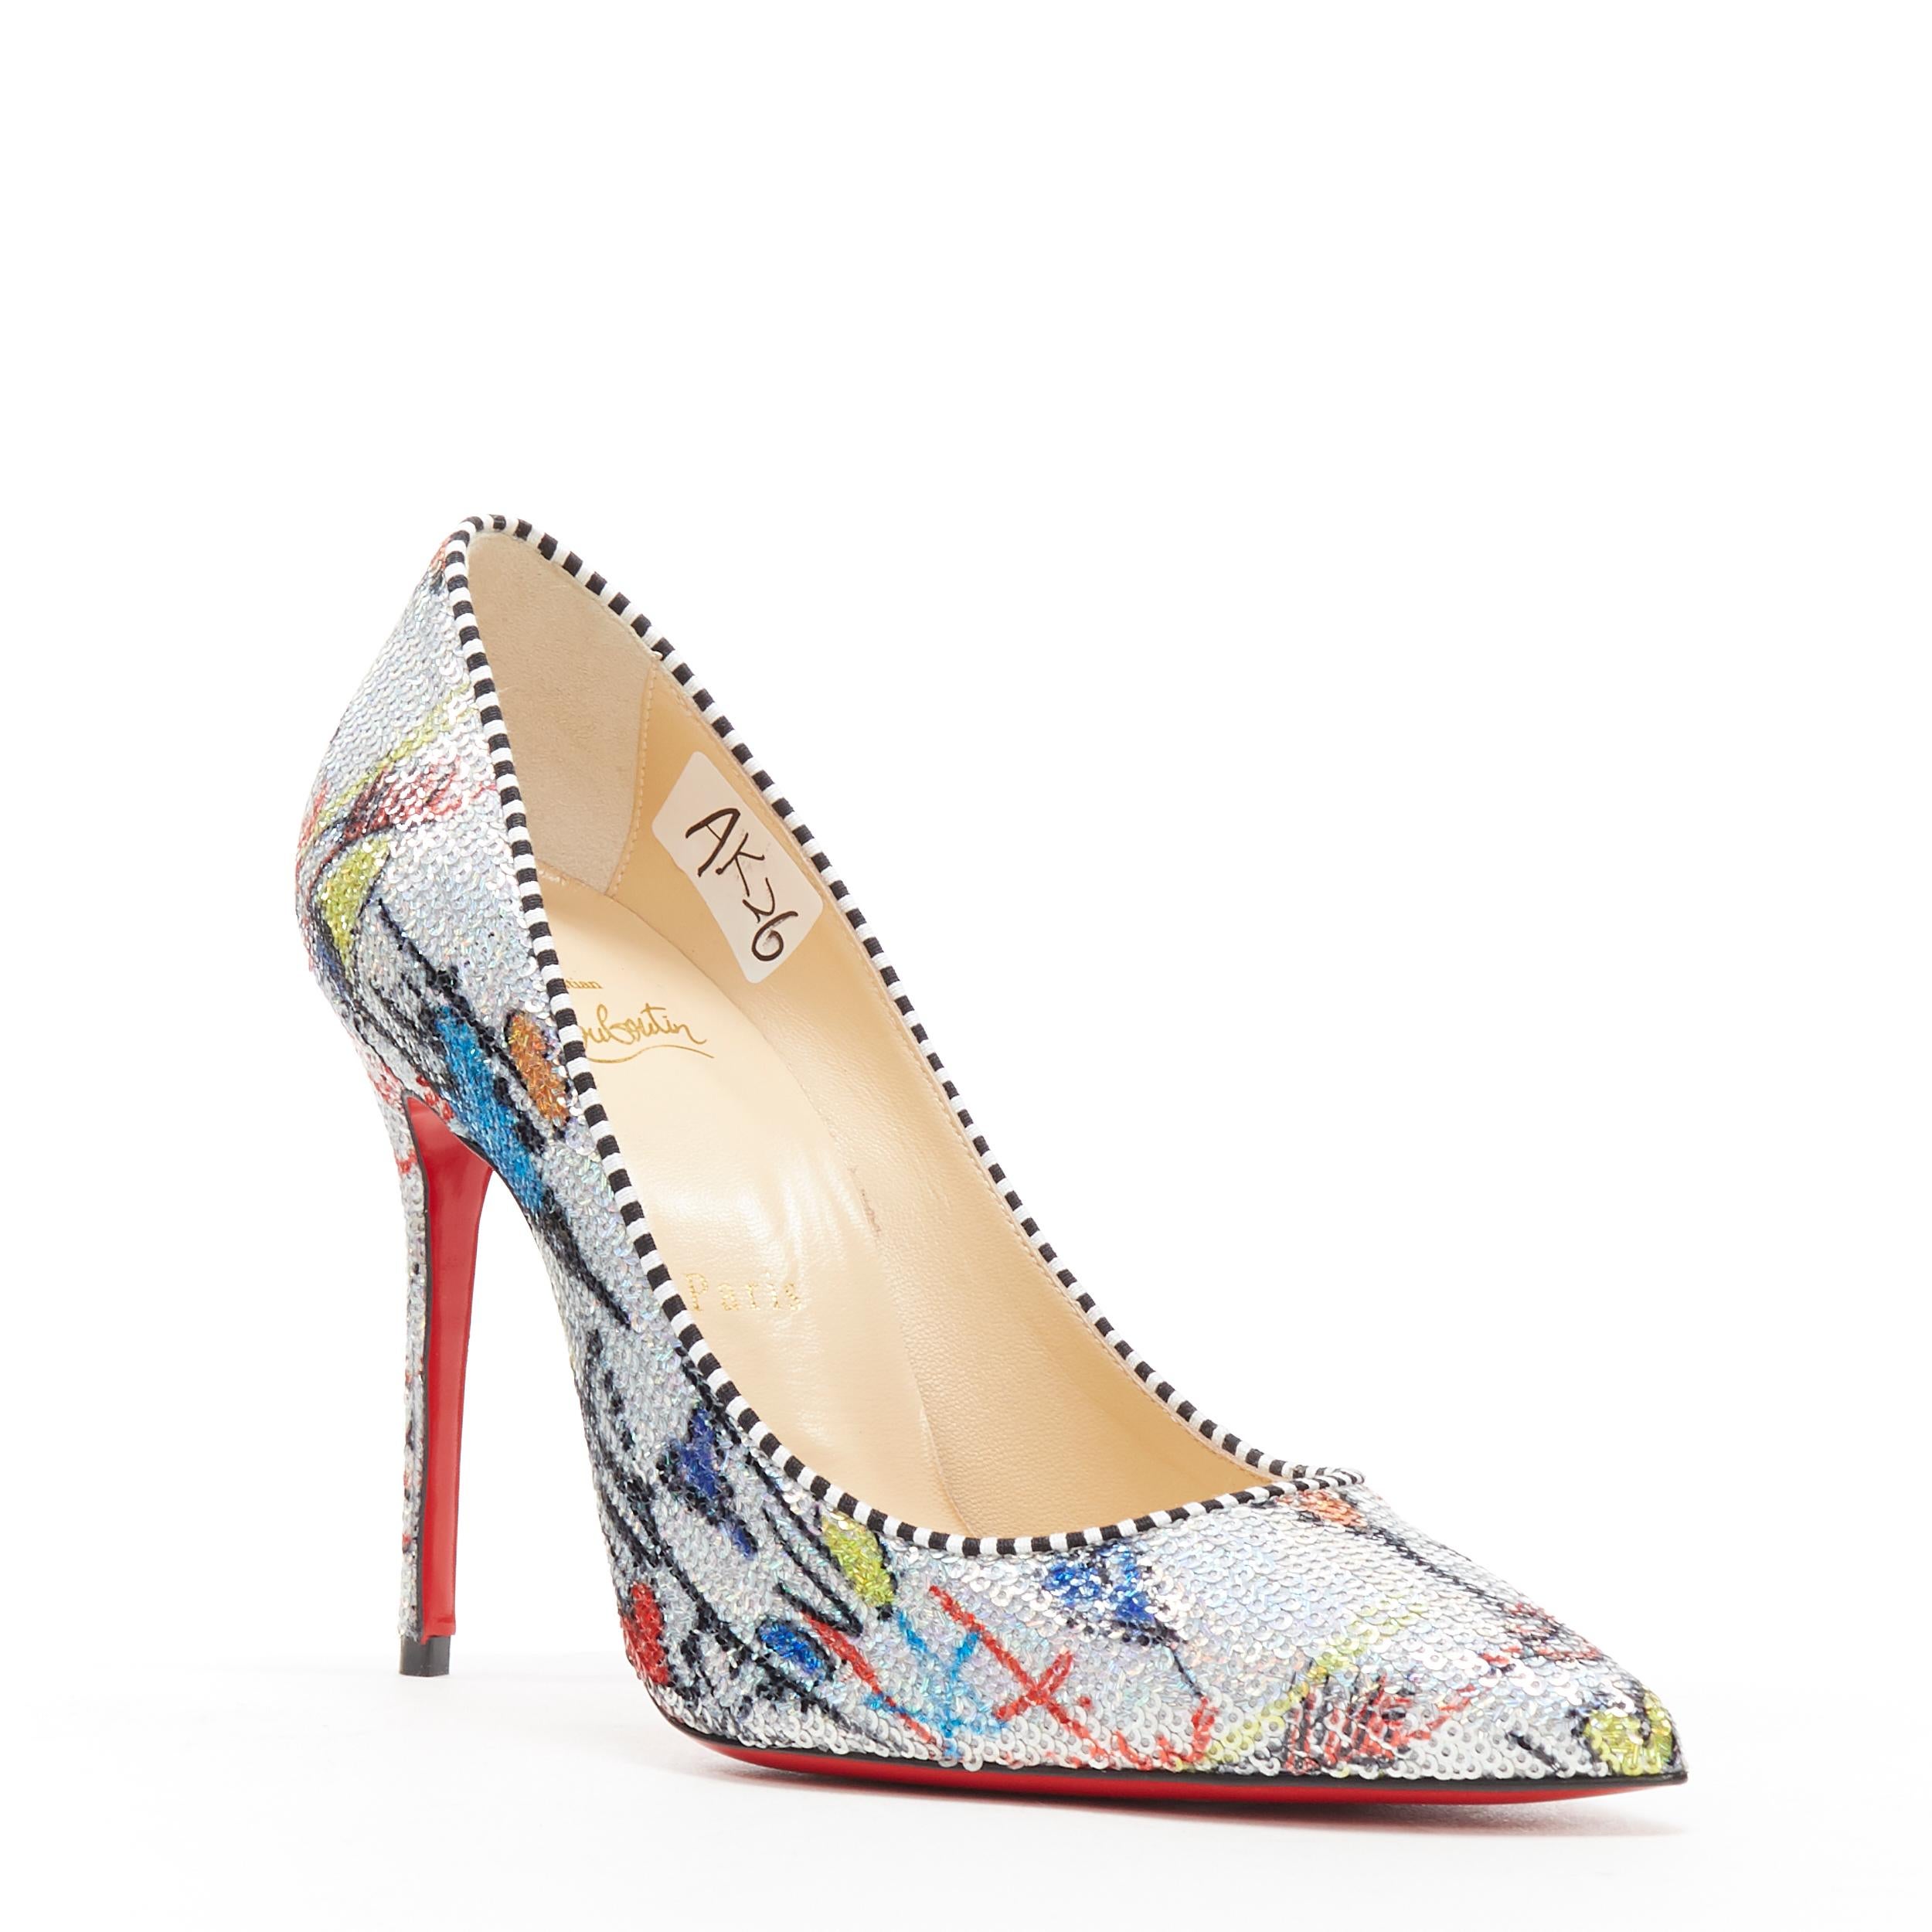 new CHRISTIAN LOUBOUTIN Kate 100 Paillette Lou silver scribble sequins pump EU38
Brand: Christian Louboutin
Designer: Christian Louboutin
Model Name / Style: Kate 100
Material: Leather
Color: Silver
Pattern: Abstract
Extra Detail: Style code: